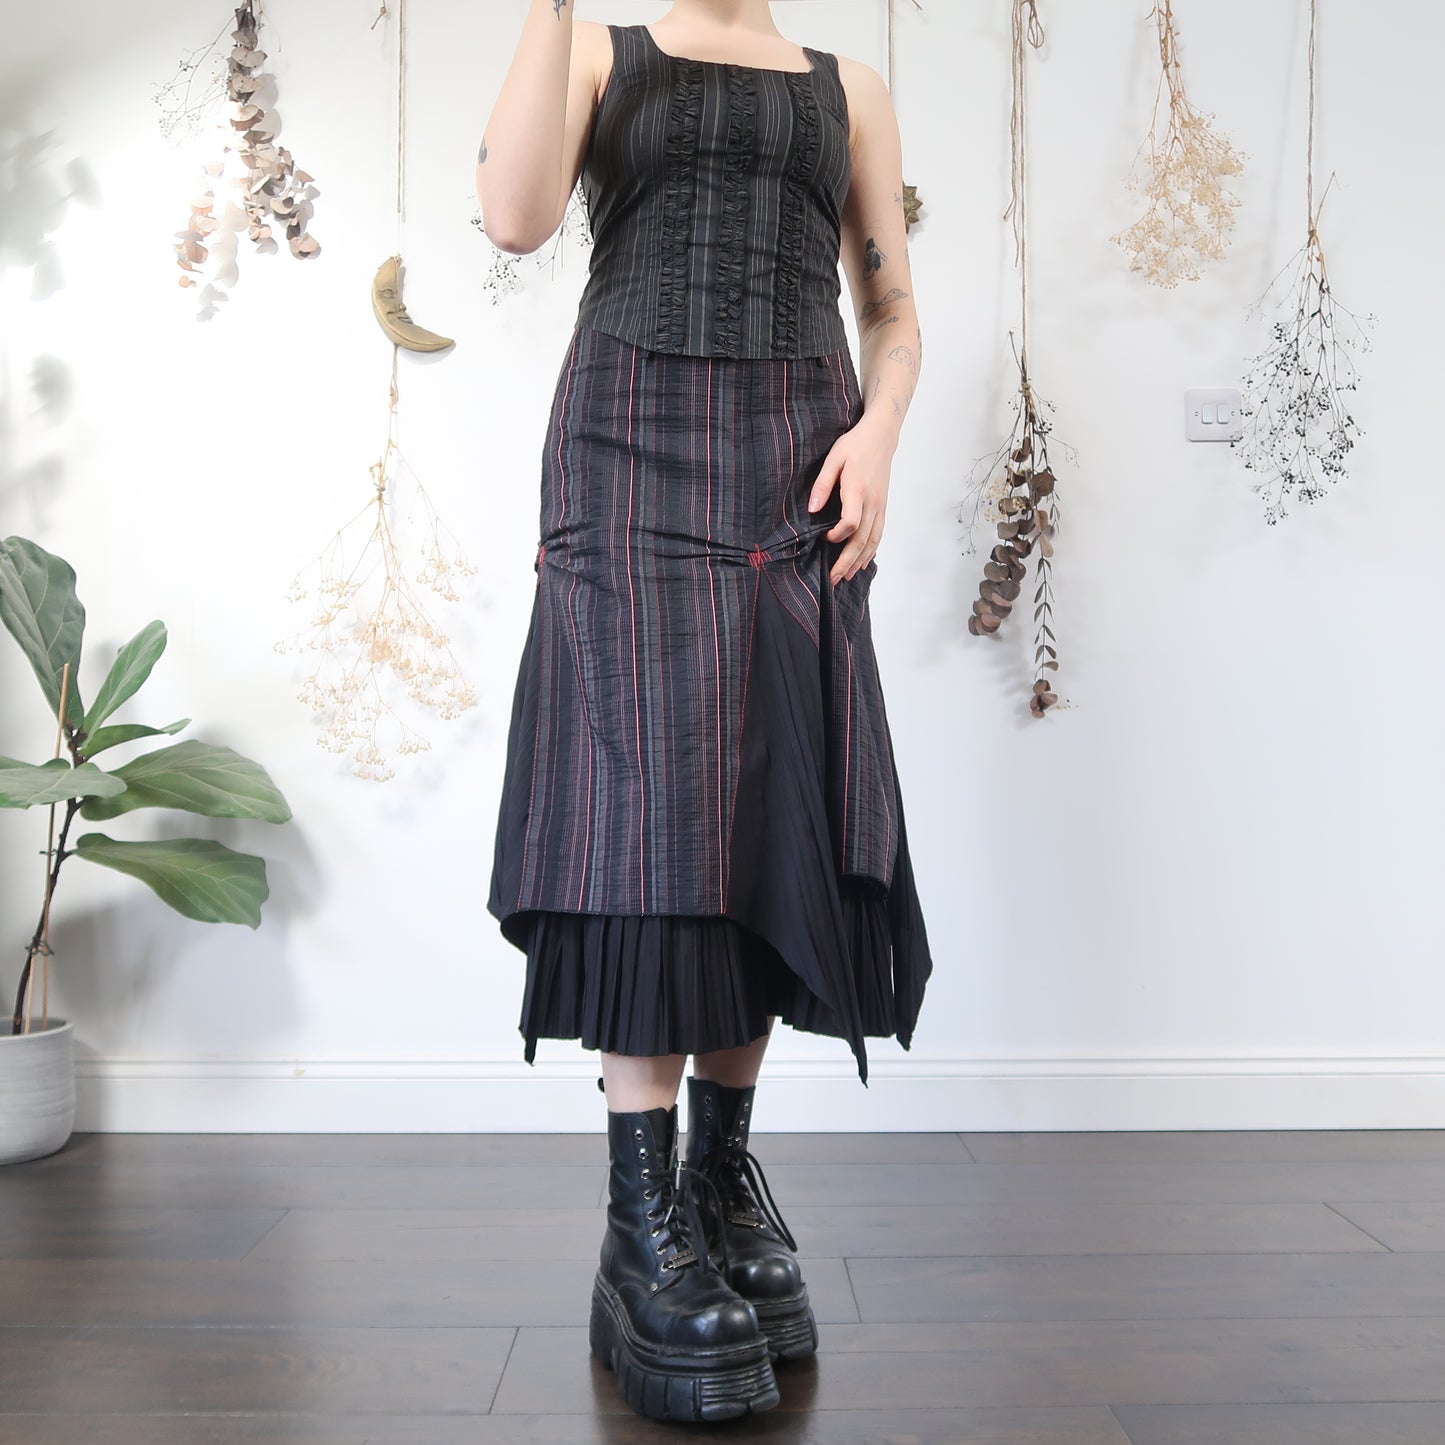 Pinstripe archive skirt - size M